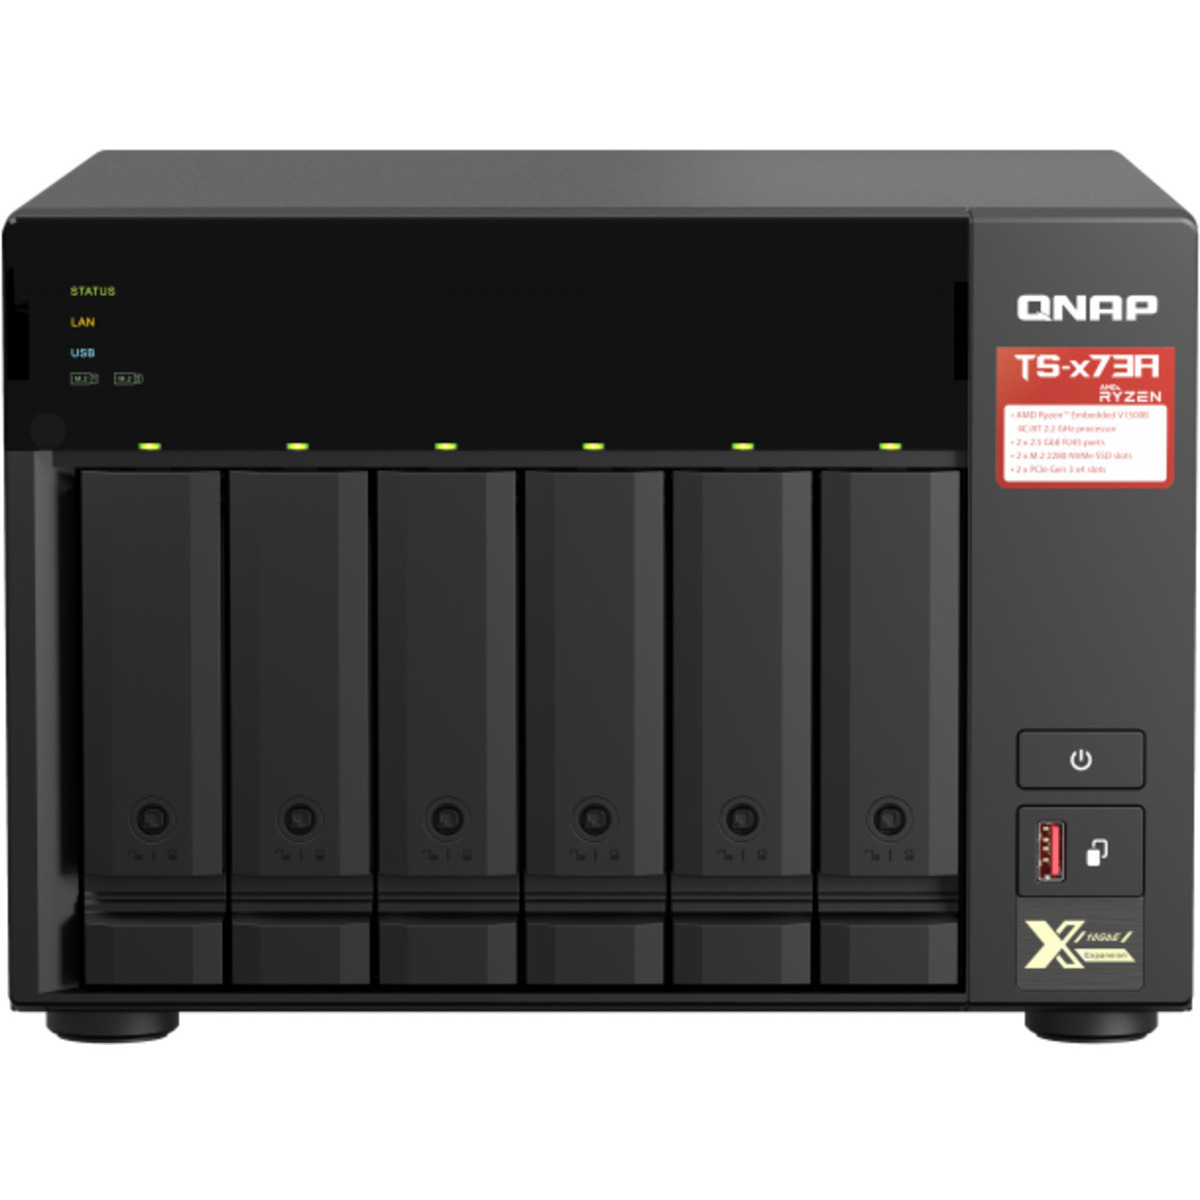 buy QNAP TS-673A 48tb Desktop NAS - Network Attached Storage Device 6x8000gb Seagate IronWolf Pro ST8000NT001 3.5 7200rpm SATA 6Gb/s HDD NAS Class Drives Installed - Burn-In Tested - ON SALE - nas headquarters buy network attached storage server device das new raid-5 free shipping usa spring sale TS-673A